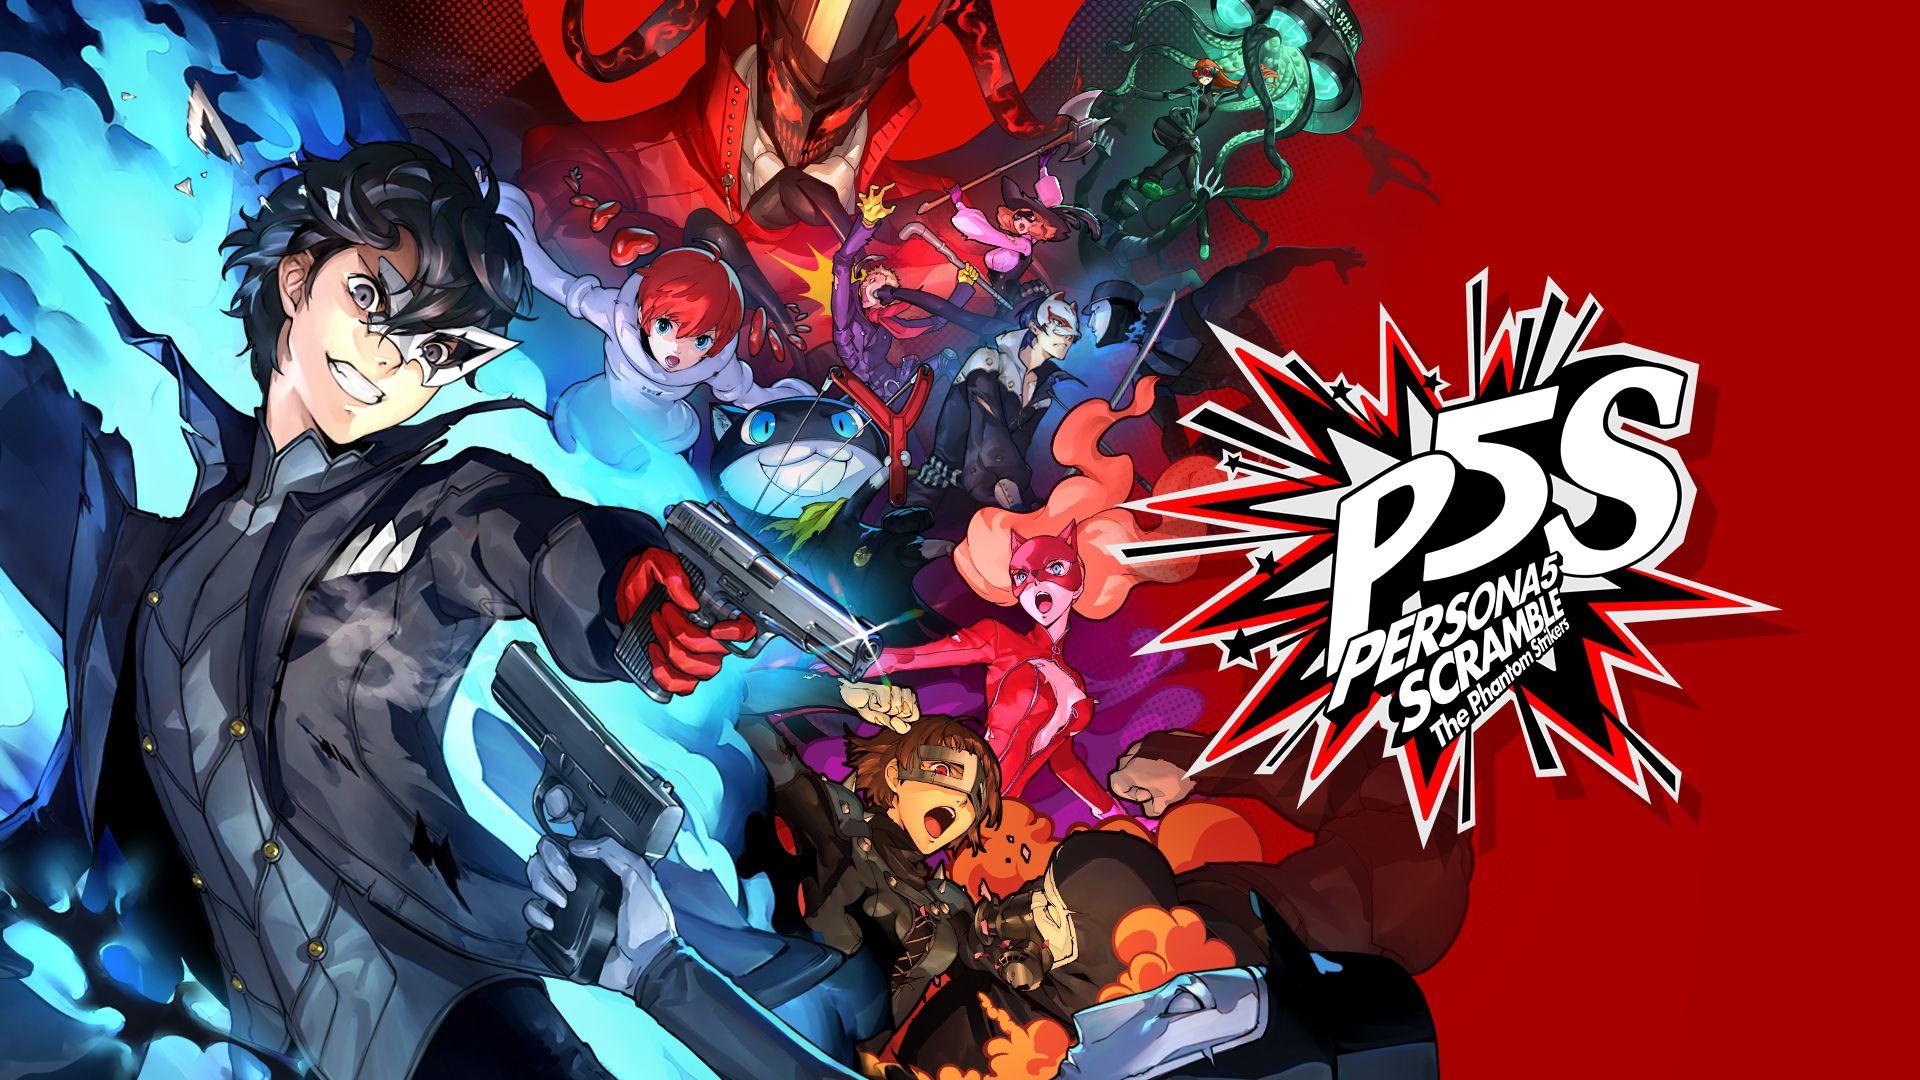 Persona 5 Strikers Wallpapers - Top Free Persona 5 Strikers Backgrounds ...